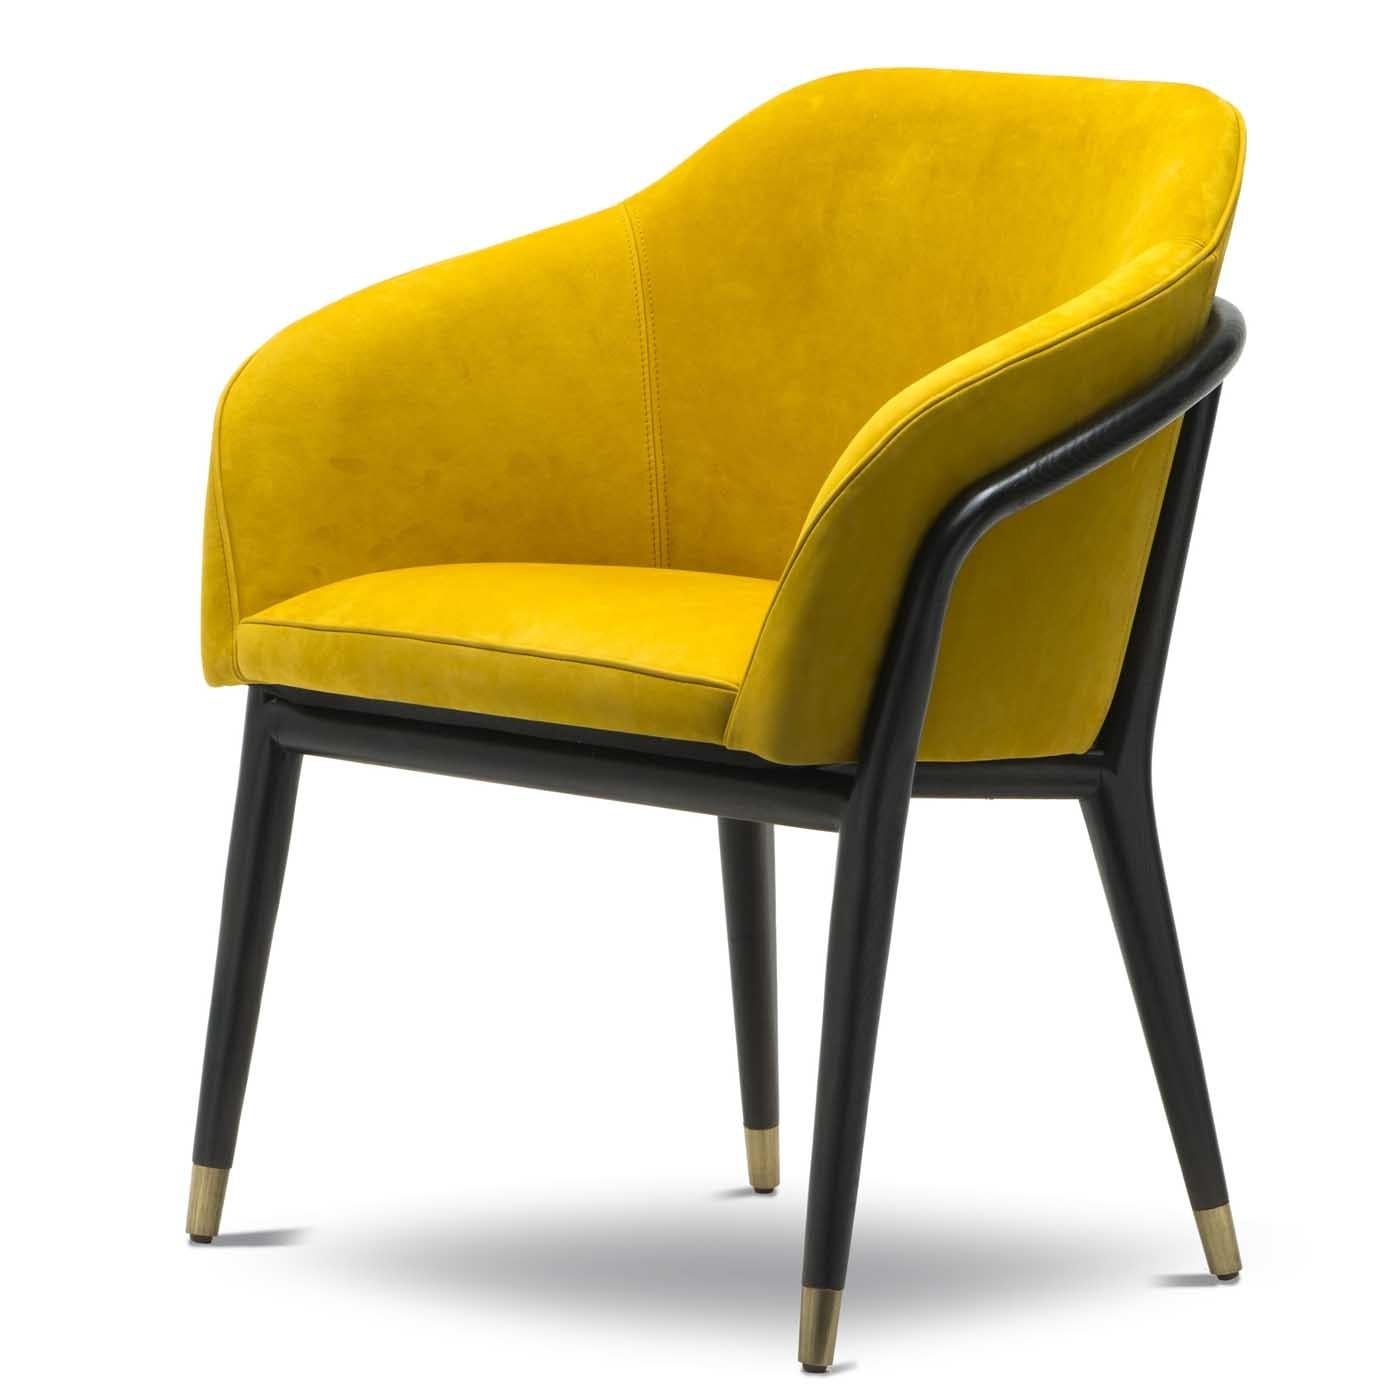 A dash of vibrant color and a midcentury inspiration are the distinctive qualities of this exquisite chair that will enliven a modern entryway, living room, or private study. The base in solid cinder-colored ash has metal tips with a satin brass